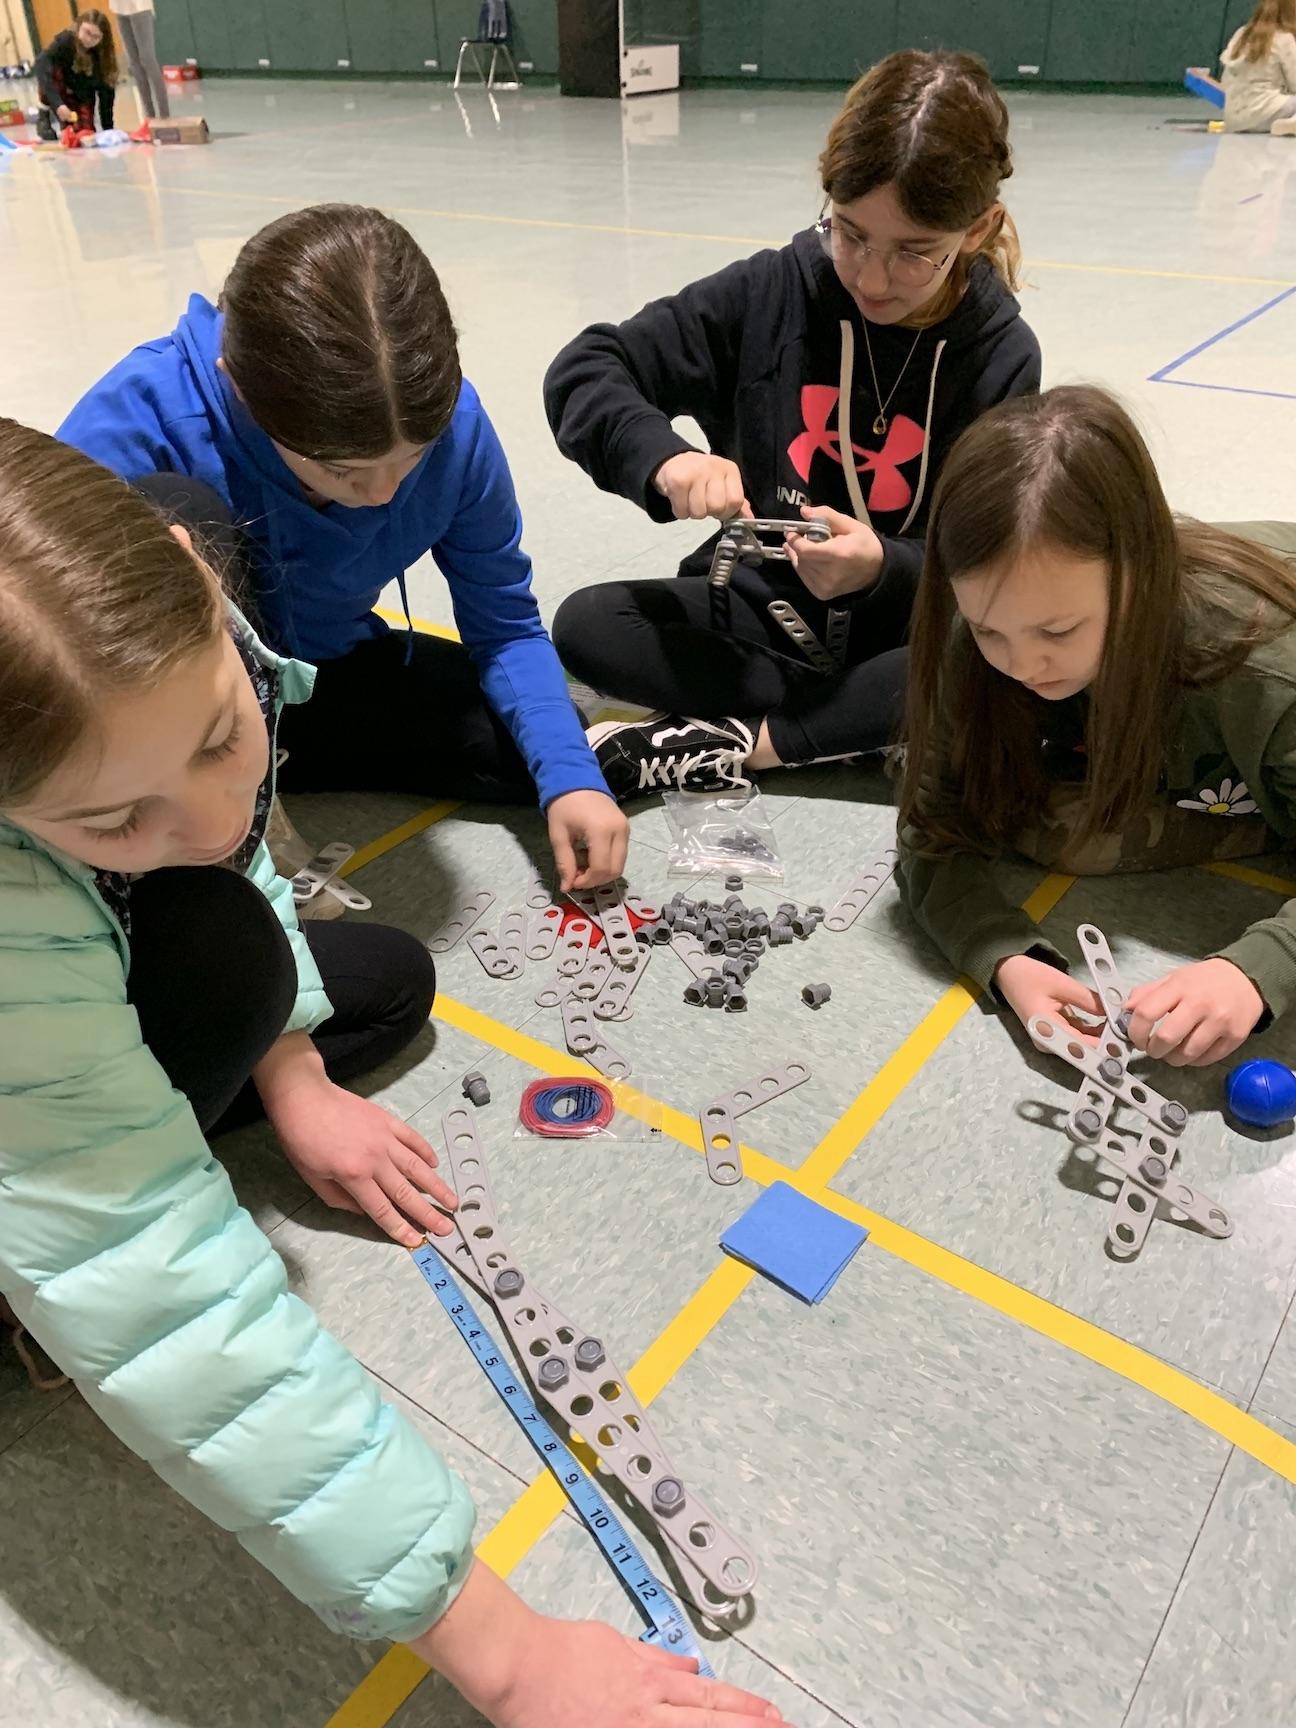 4th-graders Kiley Burnett, Talia Pecora, Gracie Beers, and Emily Ross work together to measure and build a robot arm